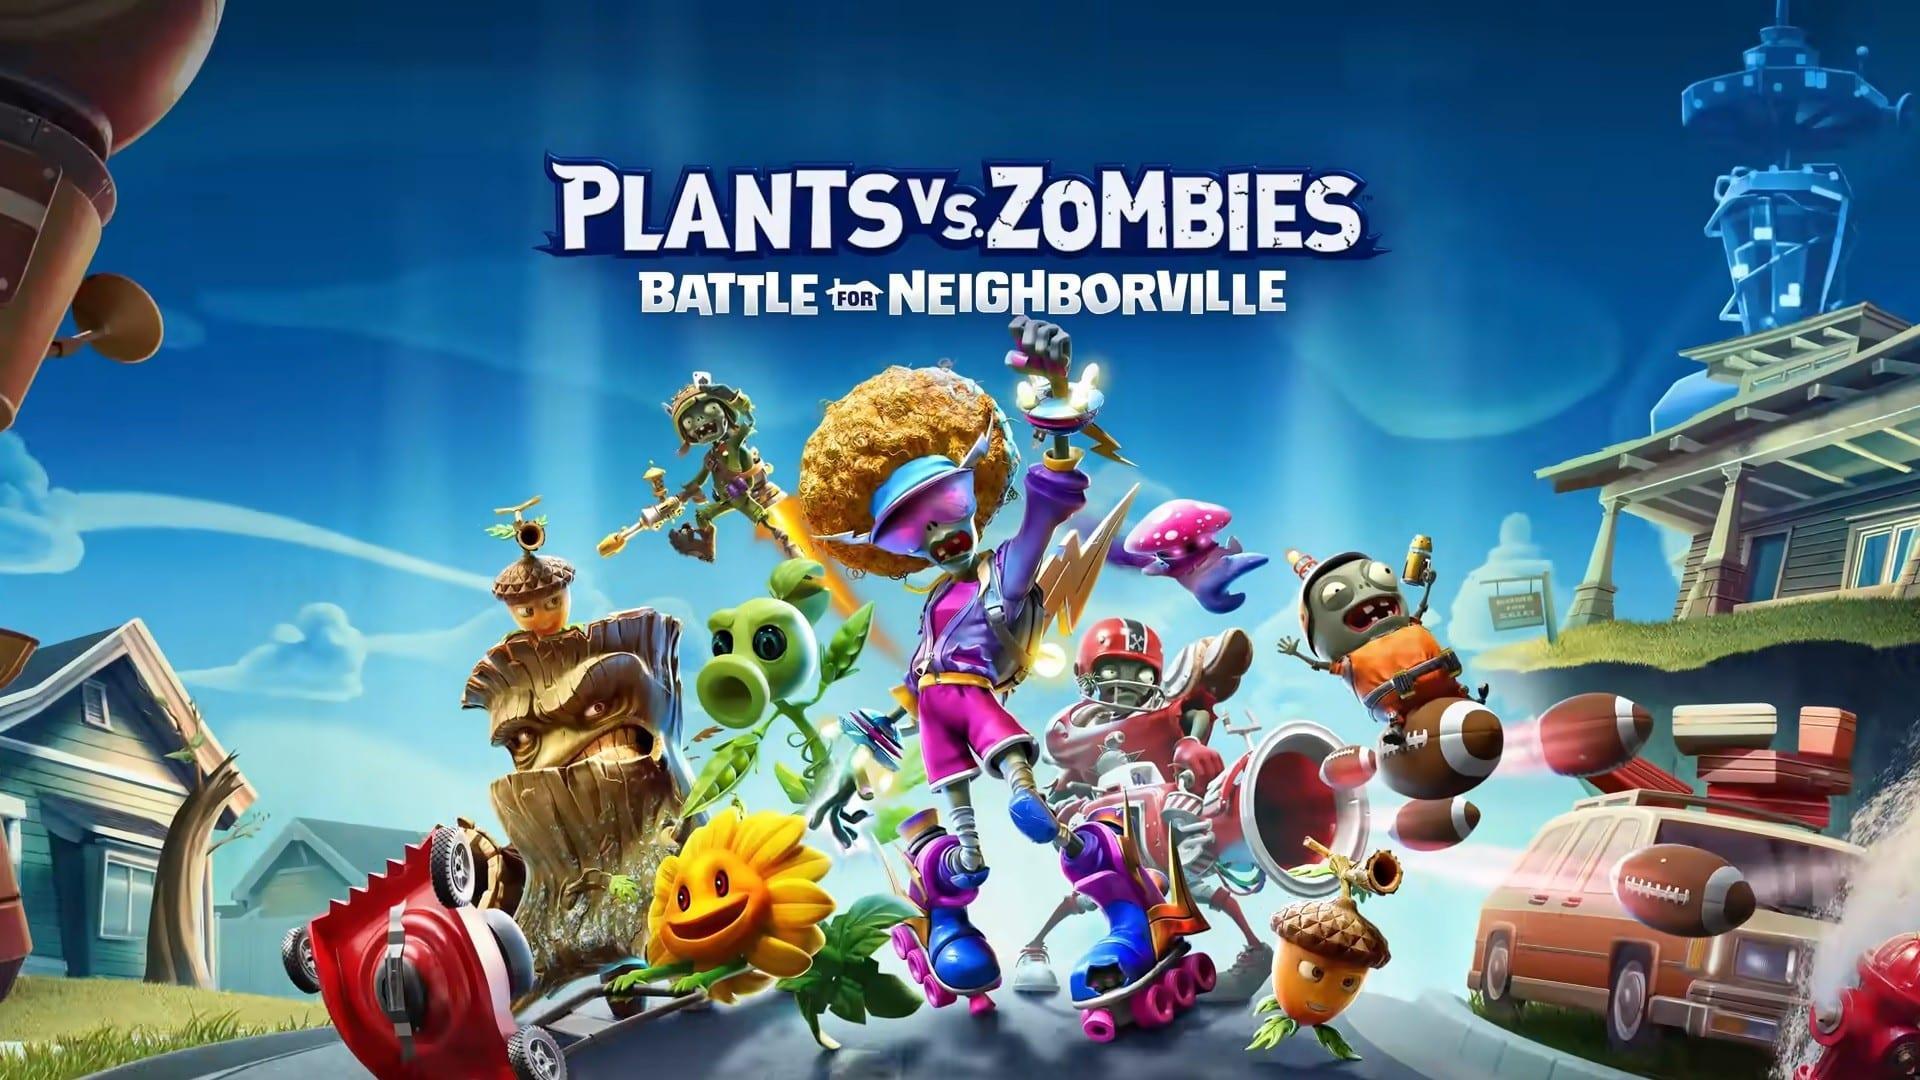 Plants vs Zombies: Battle for Neighborville sees a mad arrival on Xbox One,  PS4 and PC with the Founders Edition